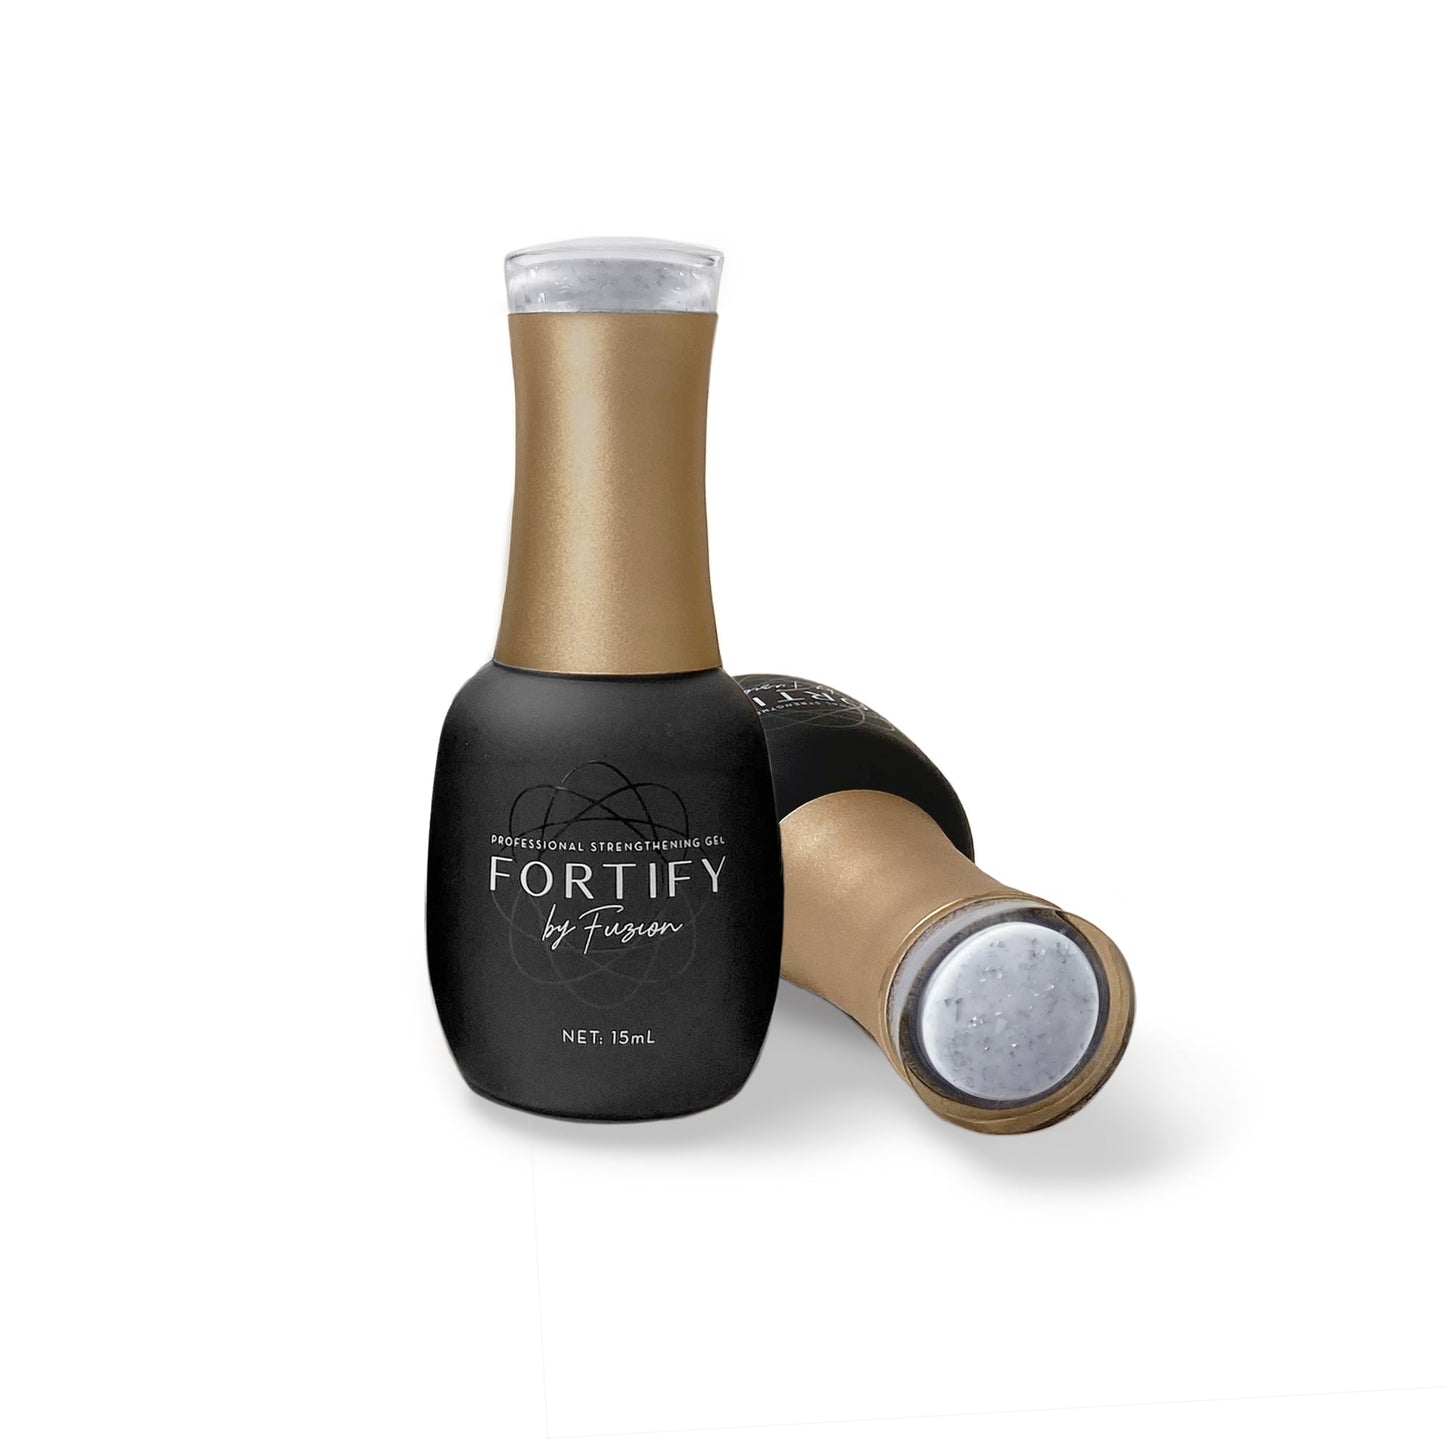 Fortify Colour Construct ~ Iced | Fortify by Fuzion 15ml